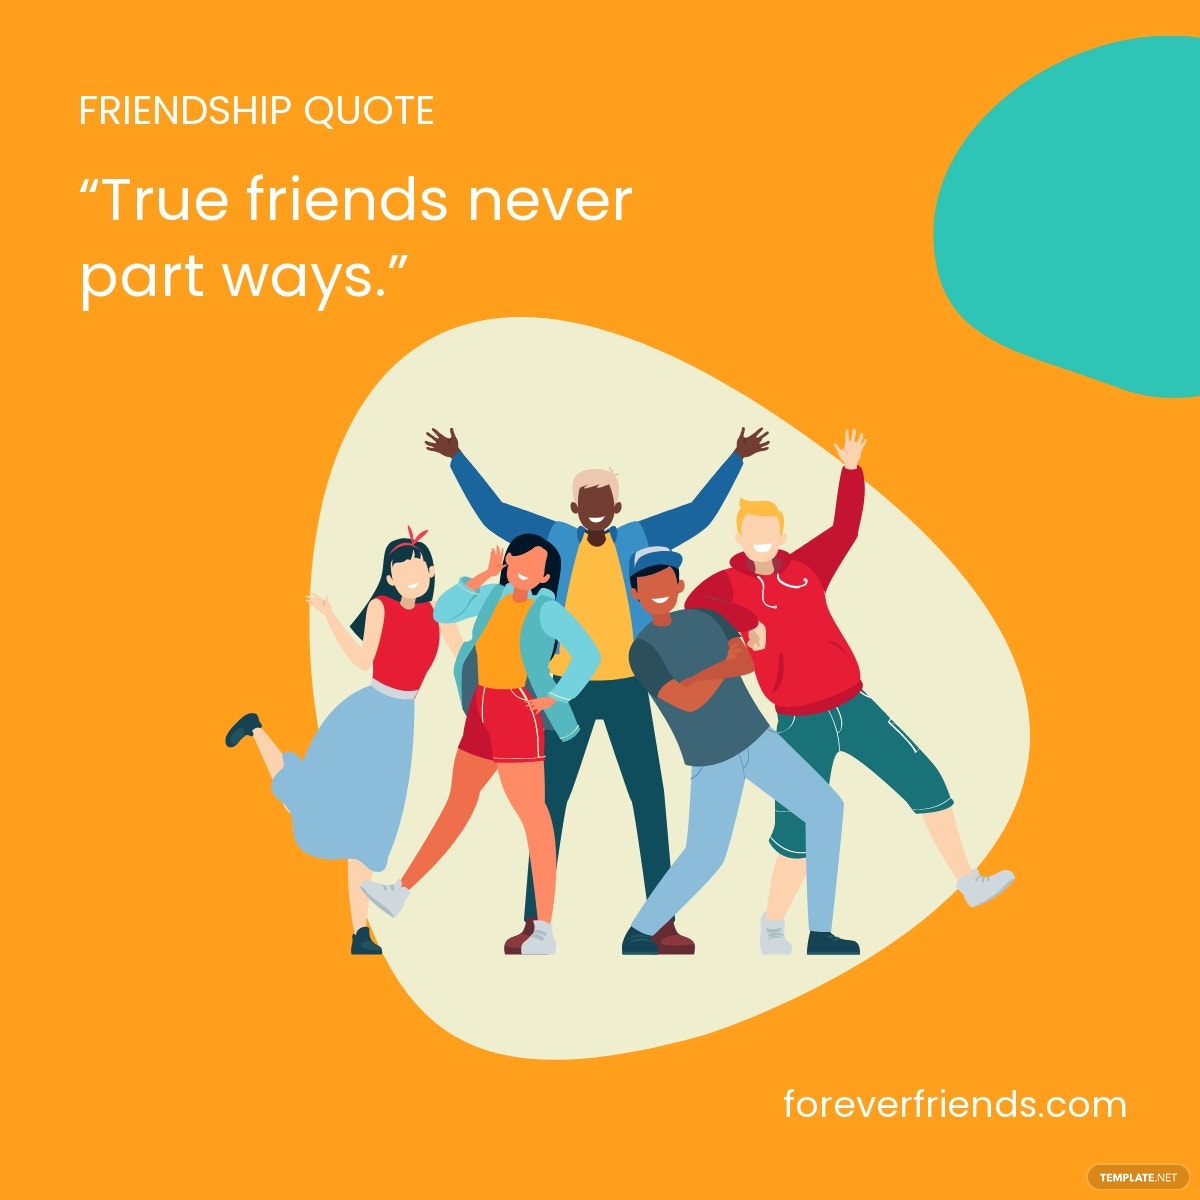 friendship quote linkedin post template